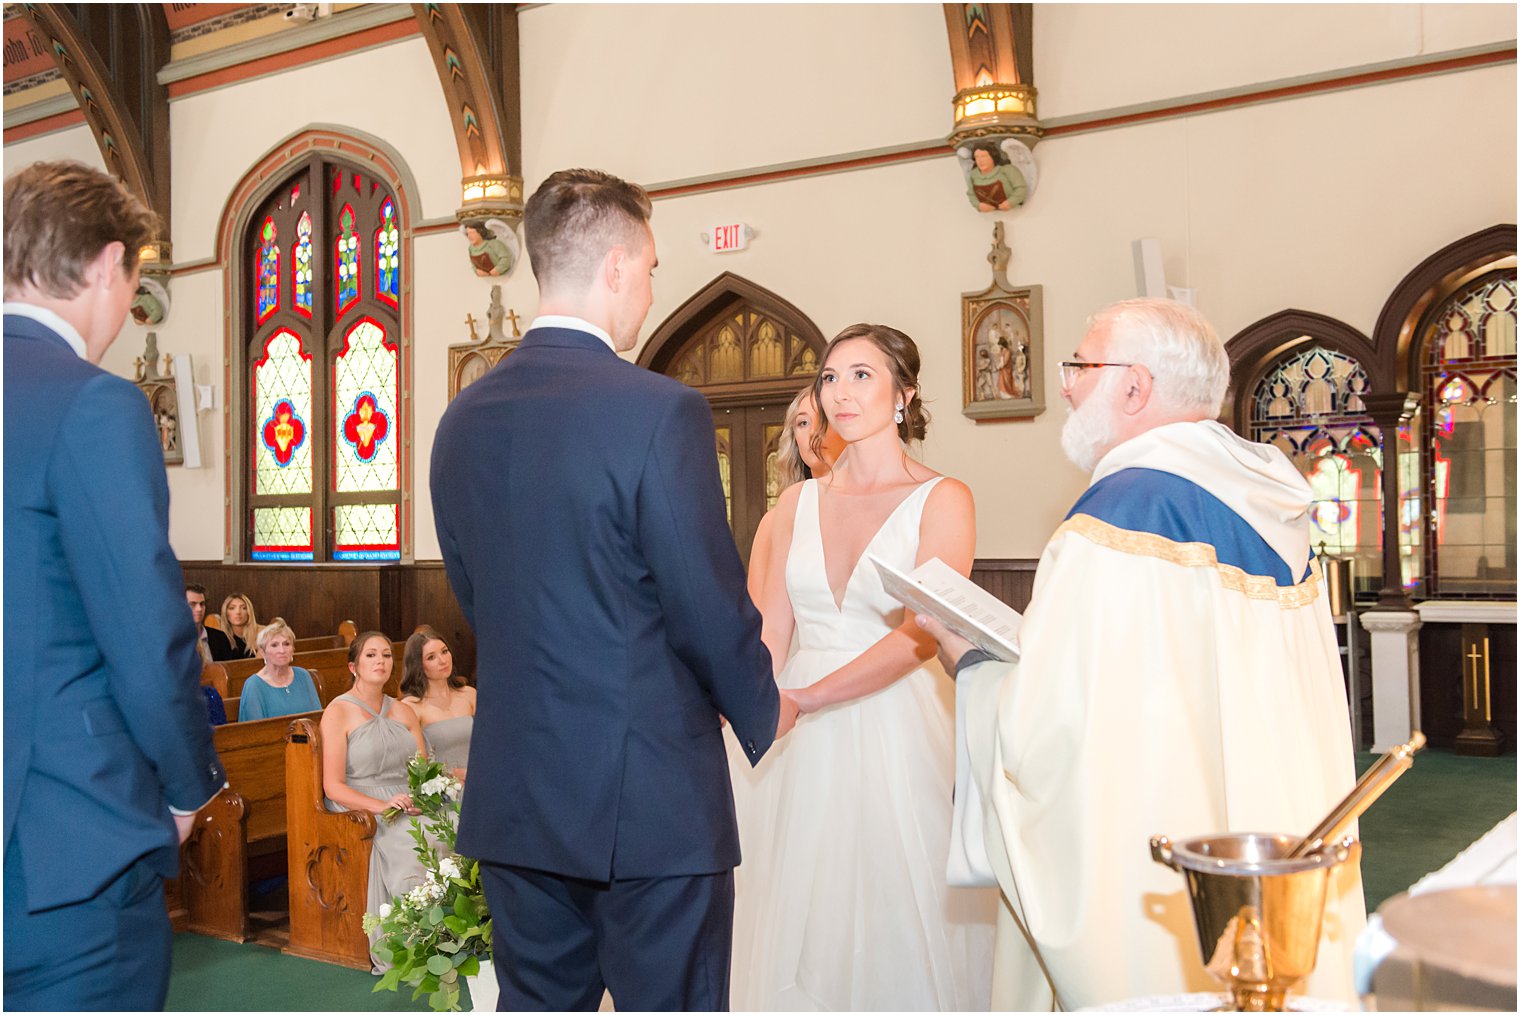 bride and groom exchange vows during traditional church wedding ceremony at St. Peter's Church